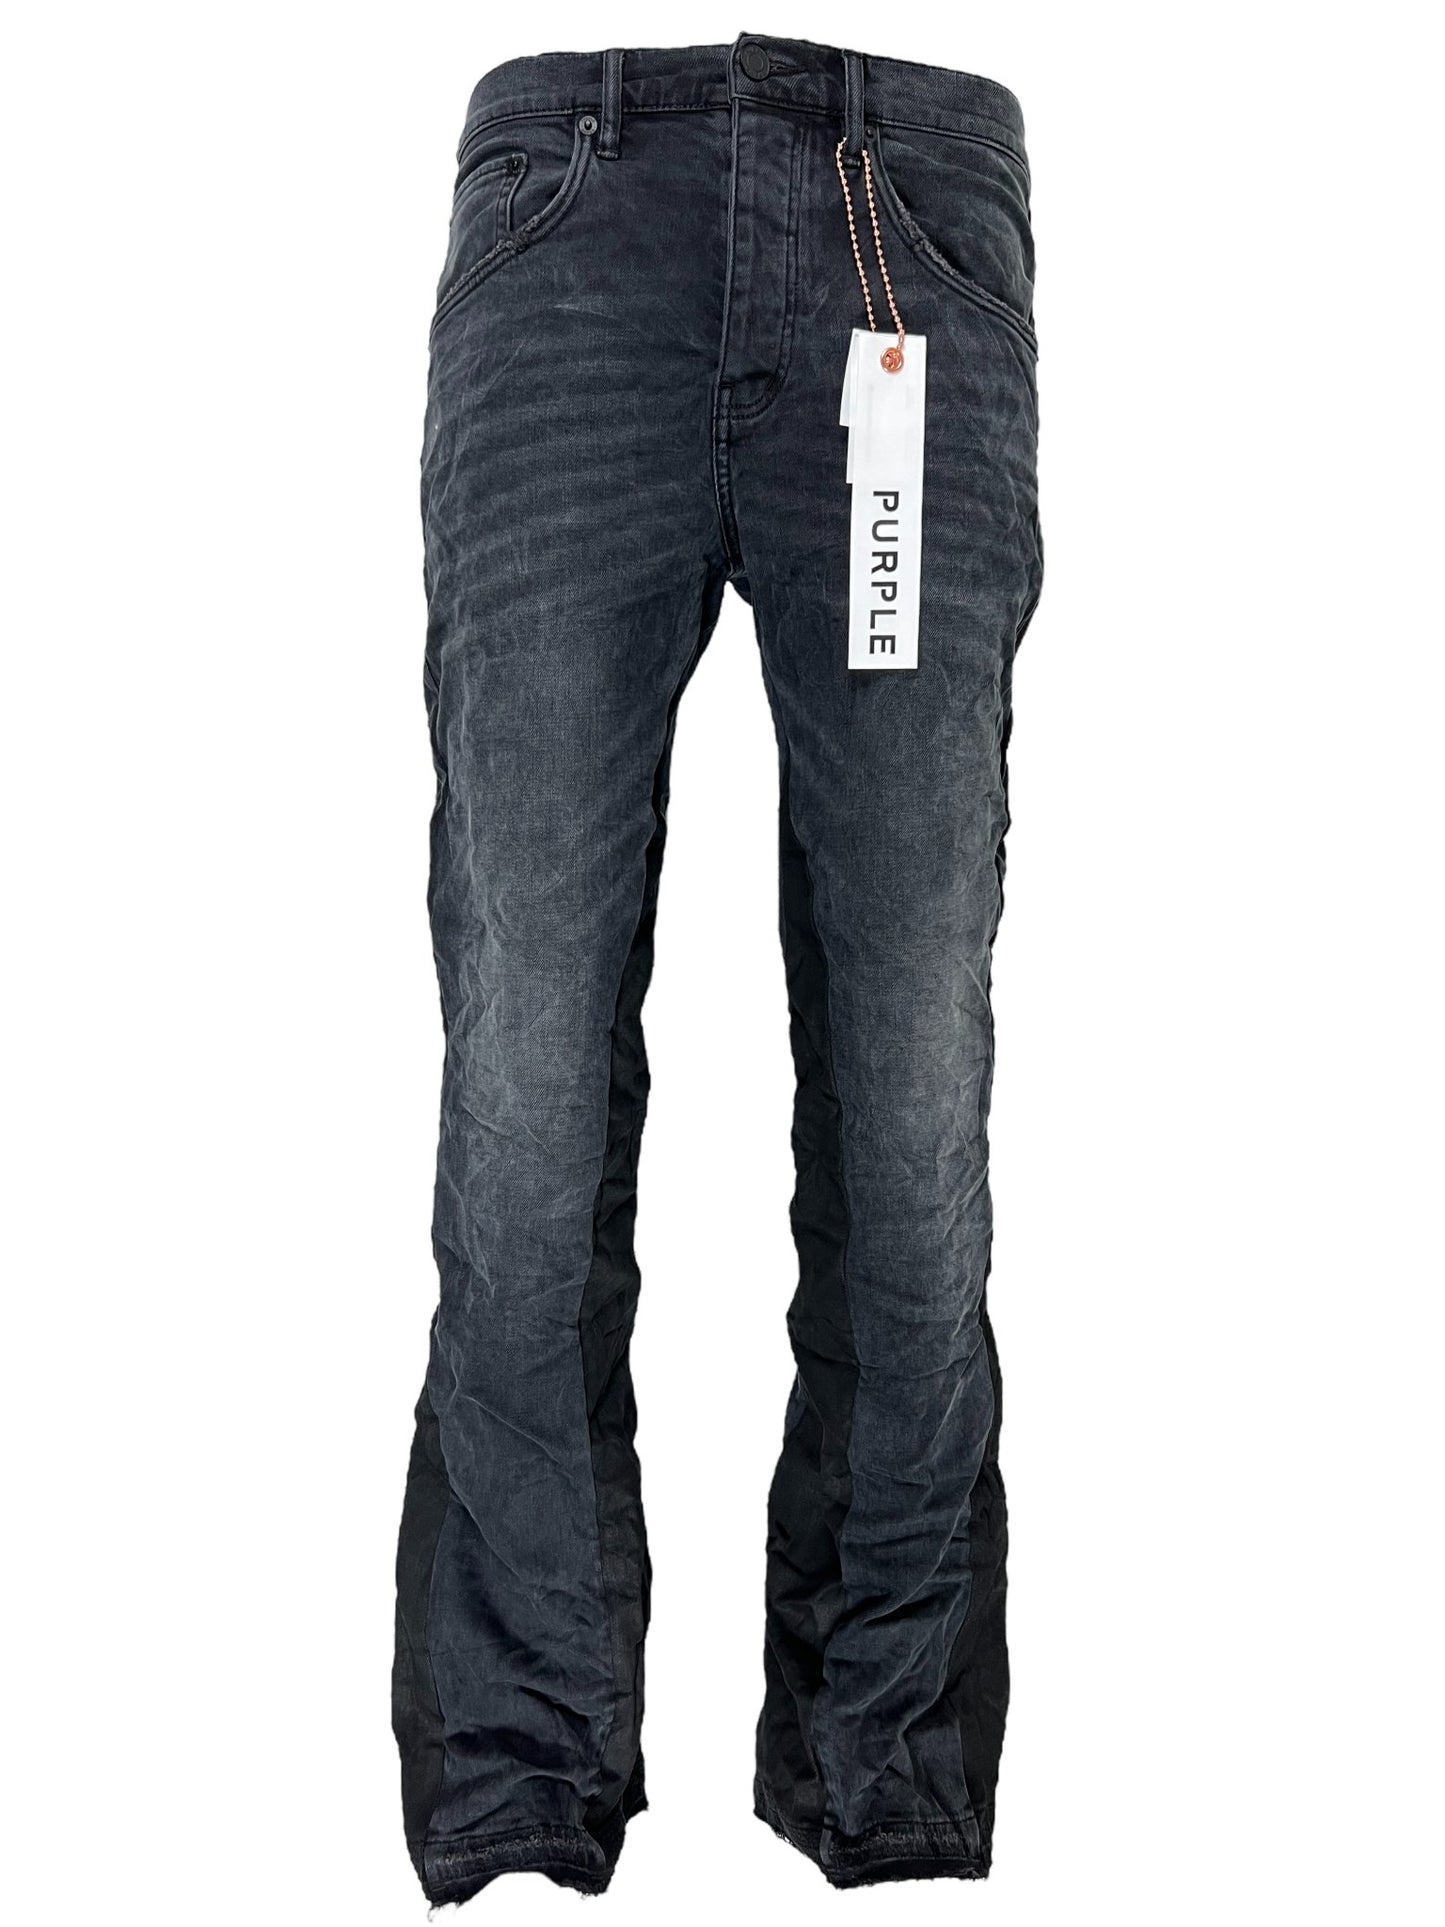 A pair of men's PURPLE BRAND JEANS P004-BLRD DOUBLE PANELS FLARE BLOWOUTS BLK with a tag on them.